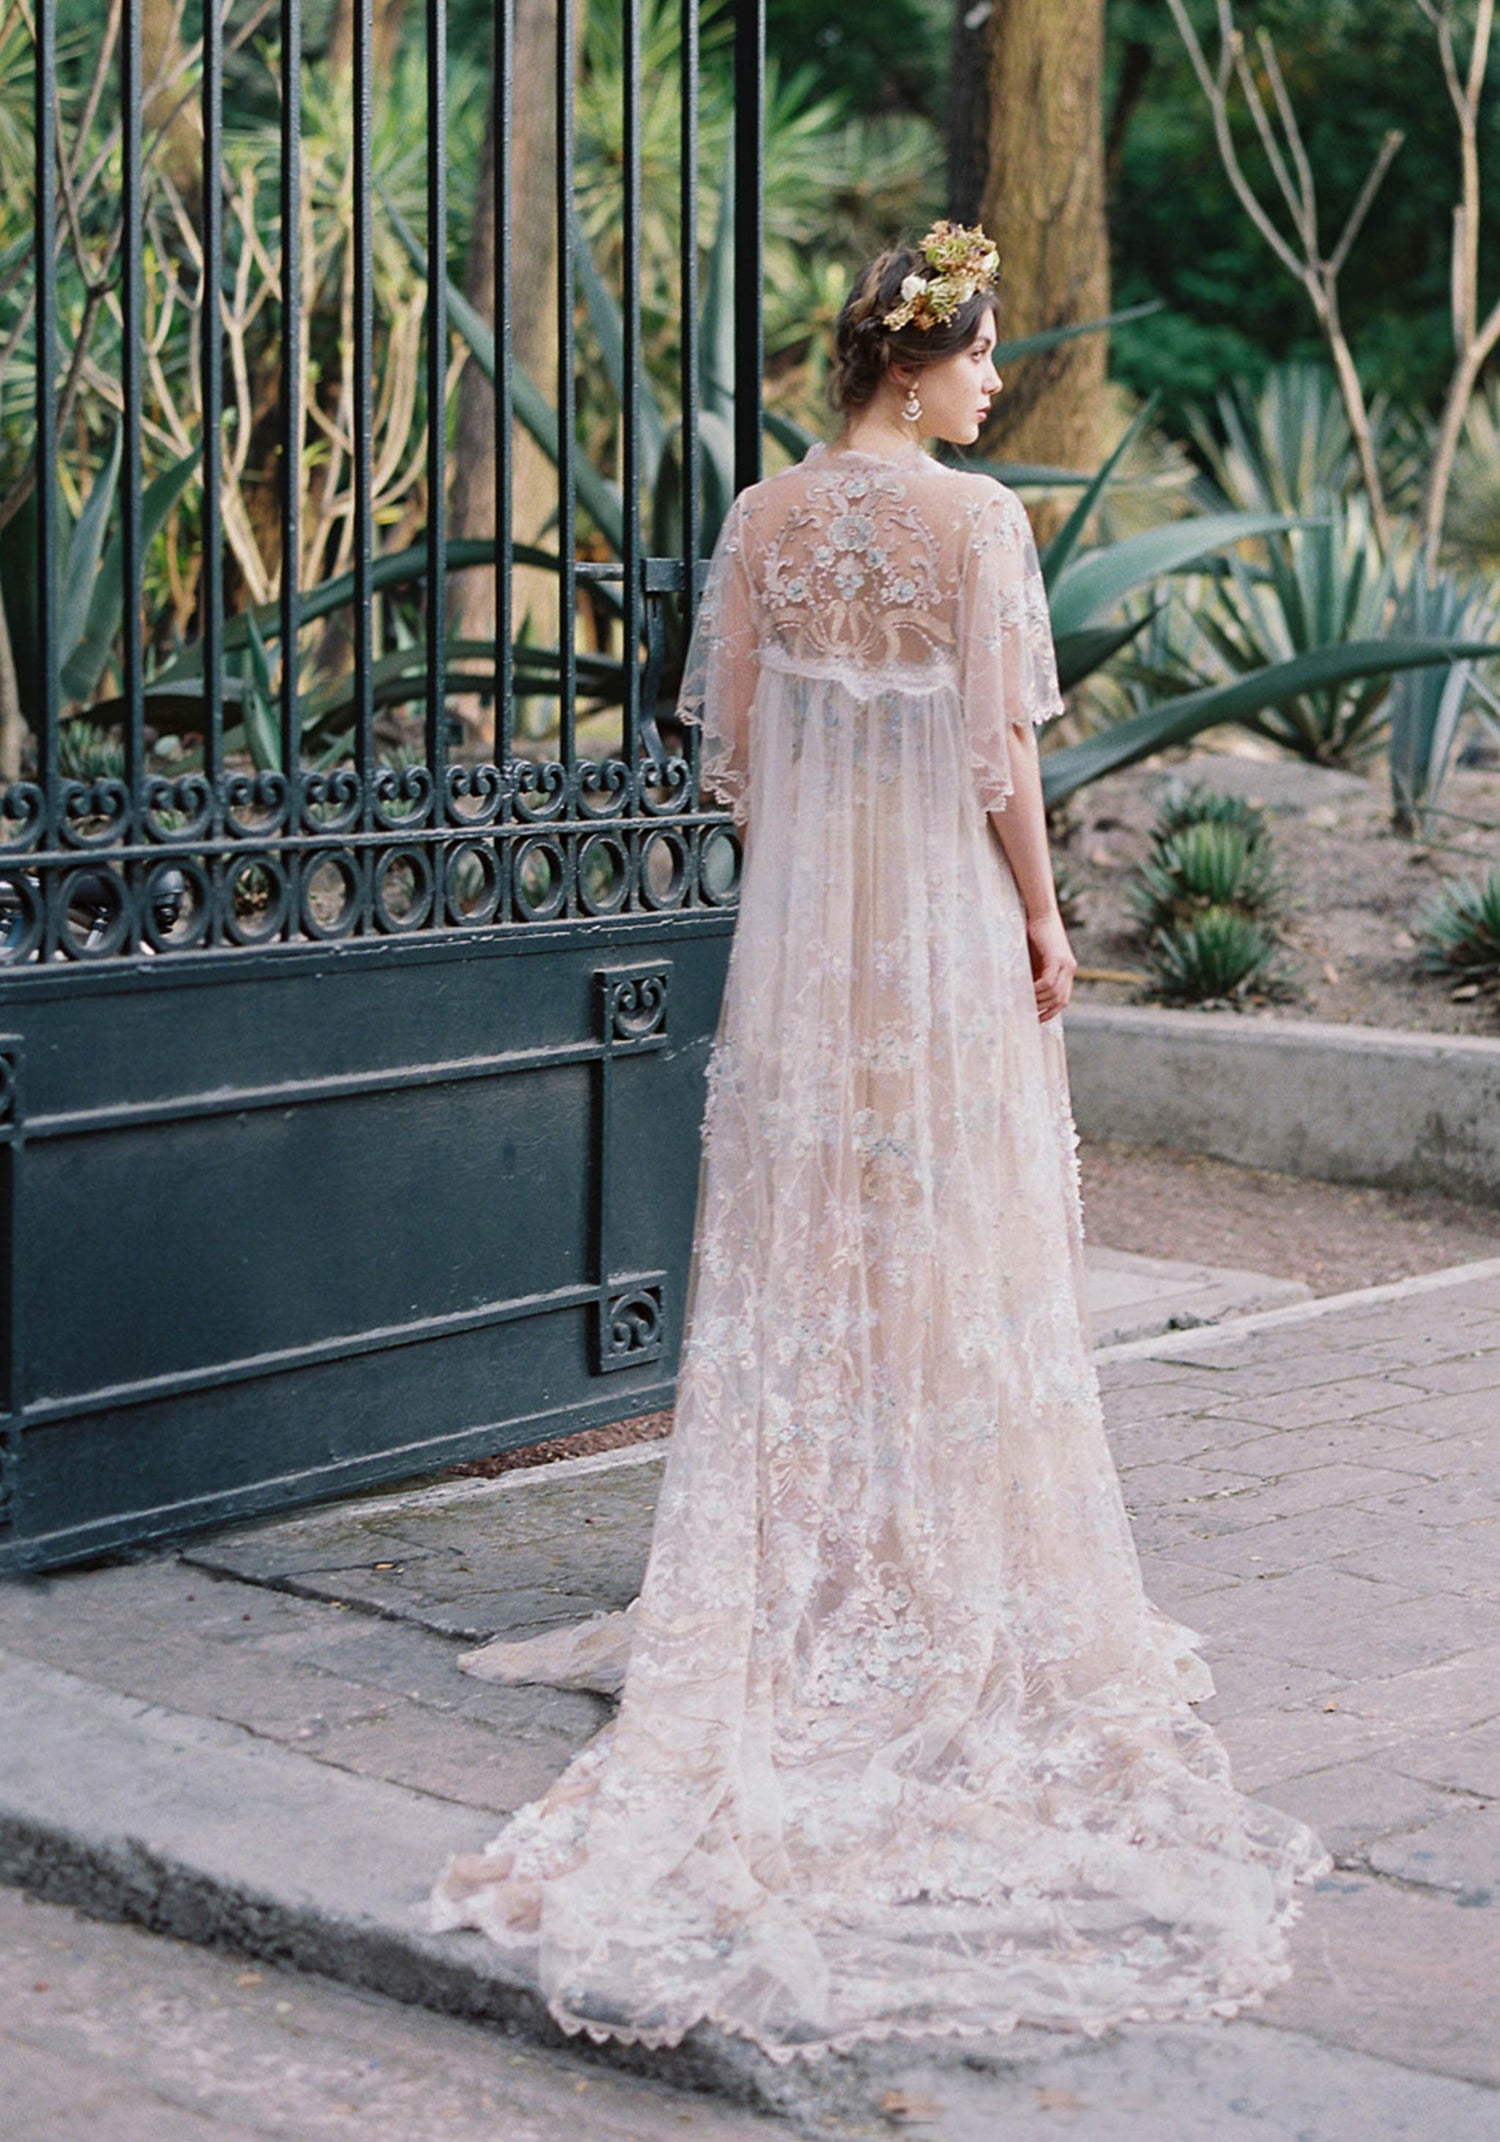 Get to know the CAPRI gown by Grace Loves Lace